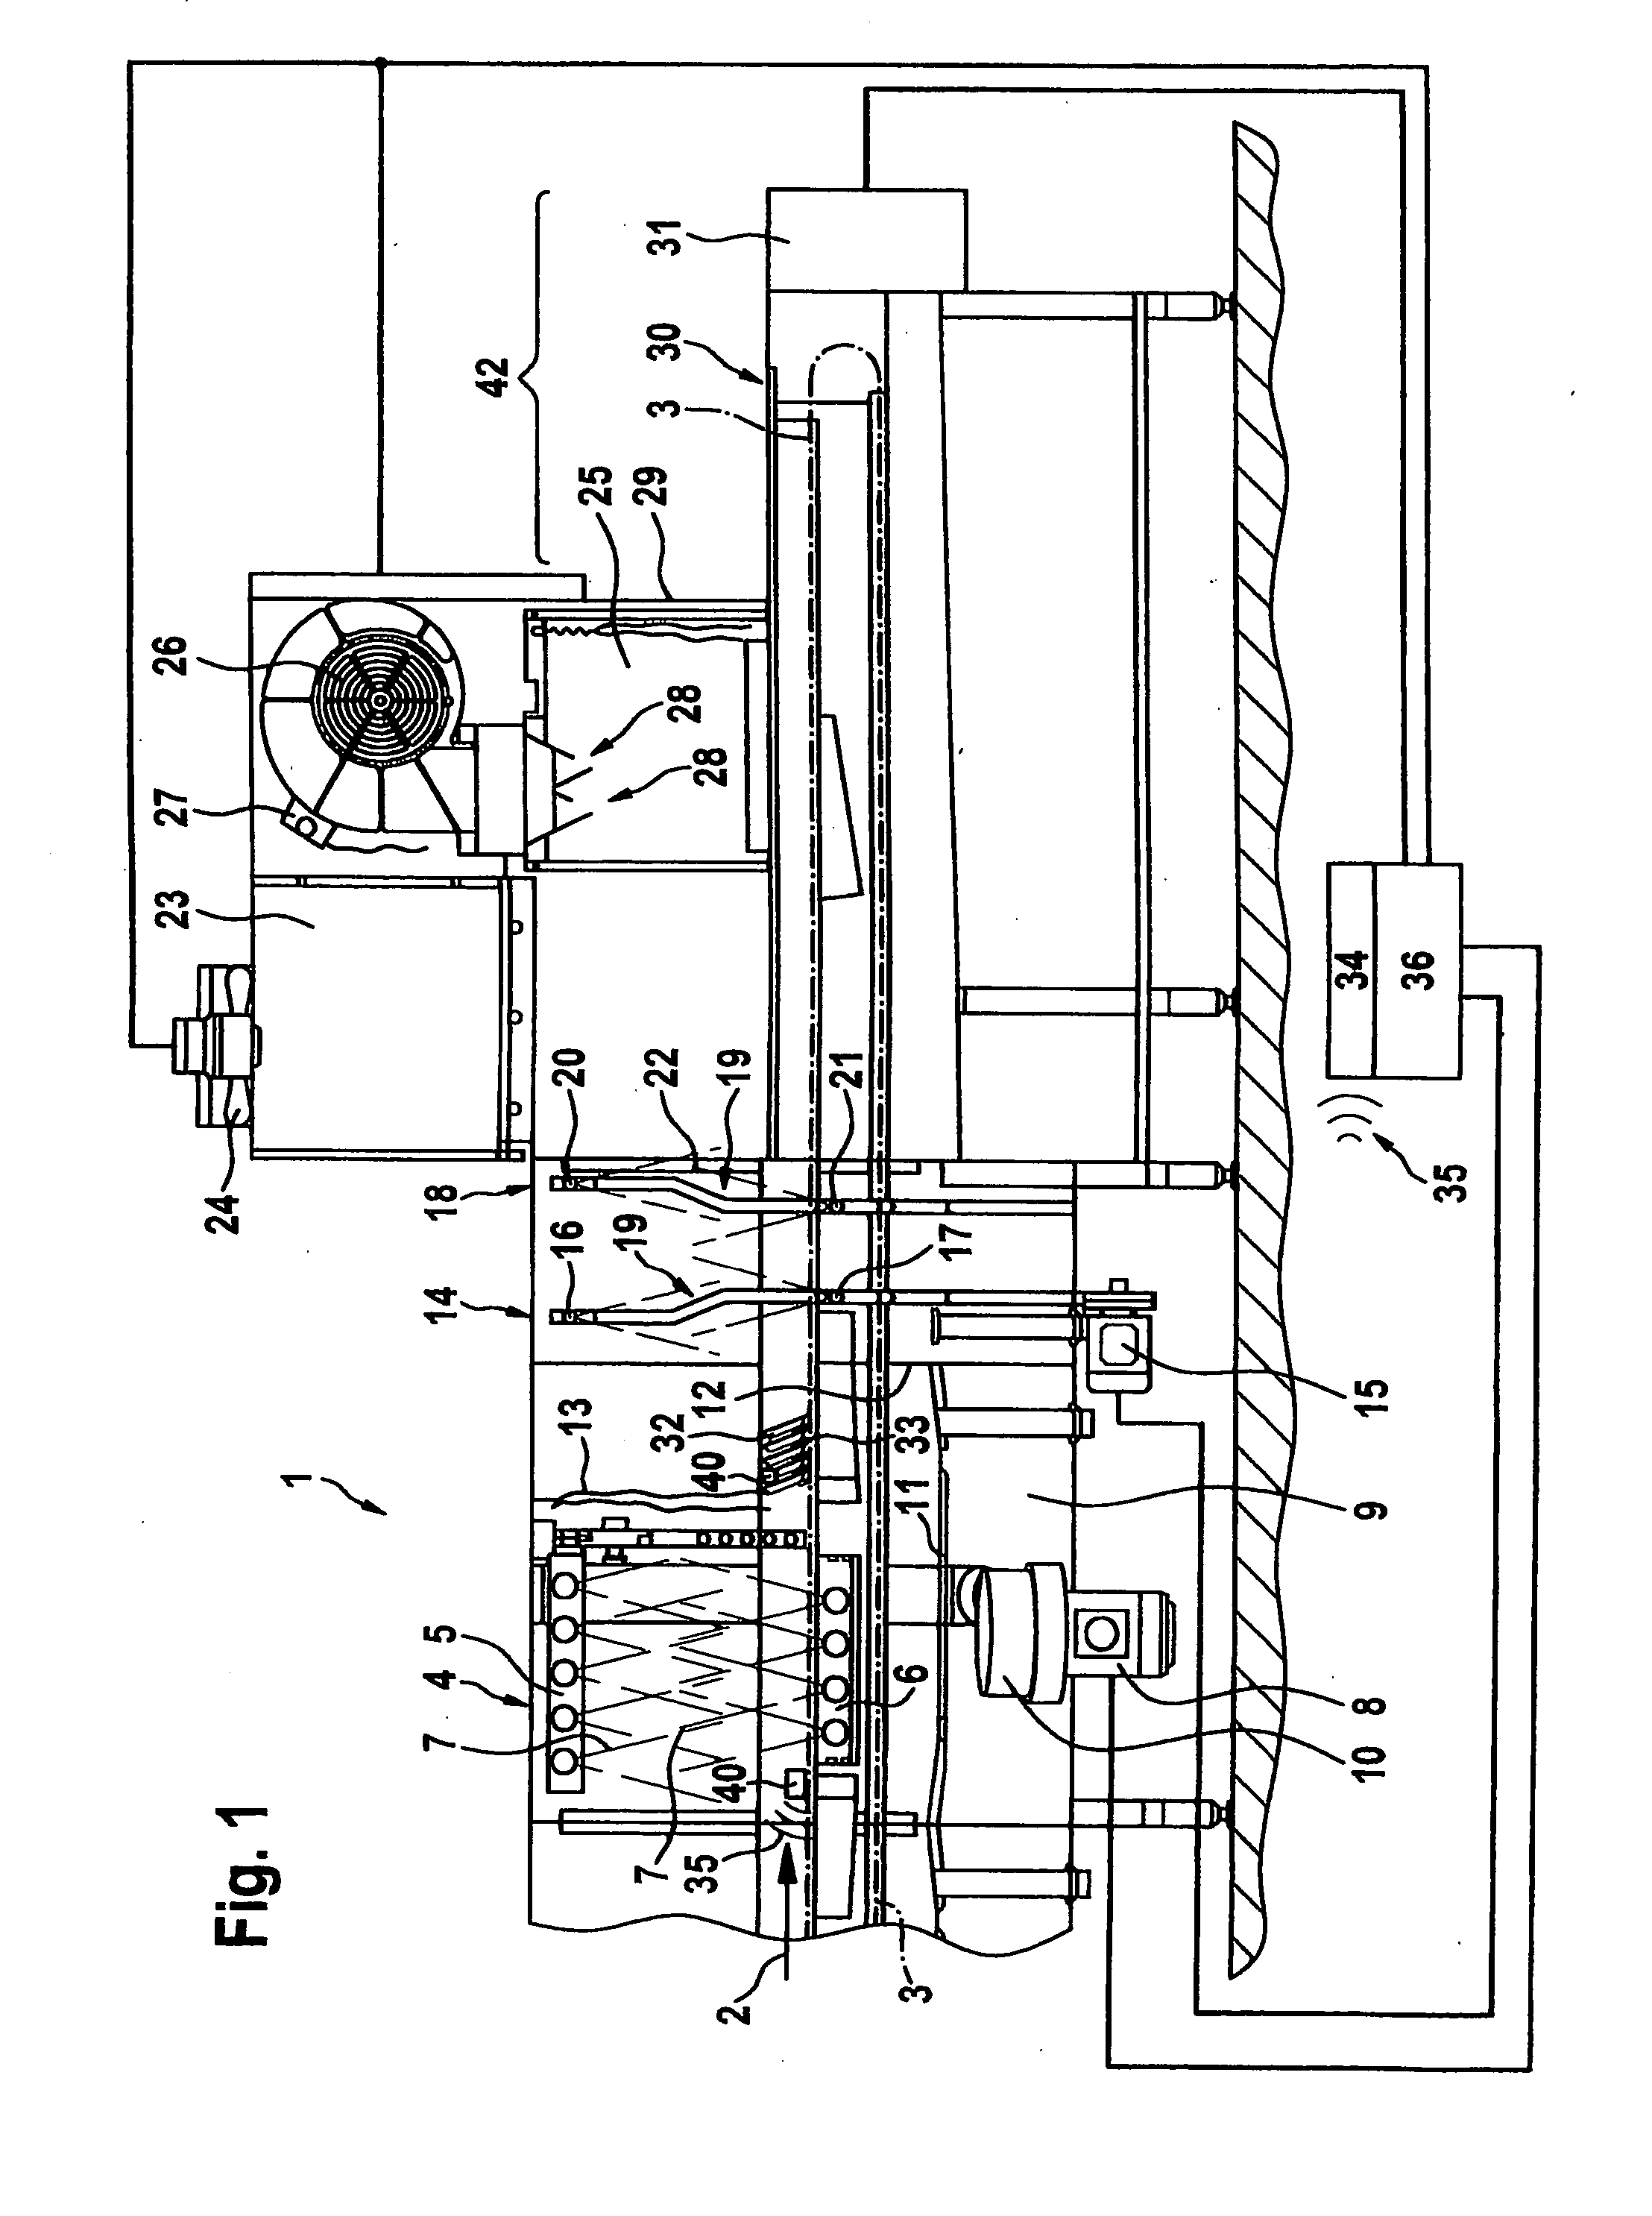 Method for assessing and guaranteeing the thermal hygiene efficiency in a multi-tank dishwasher